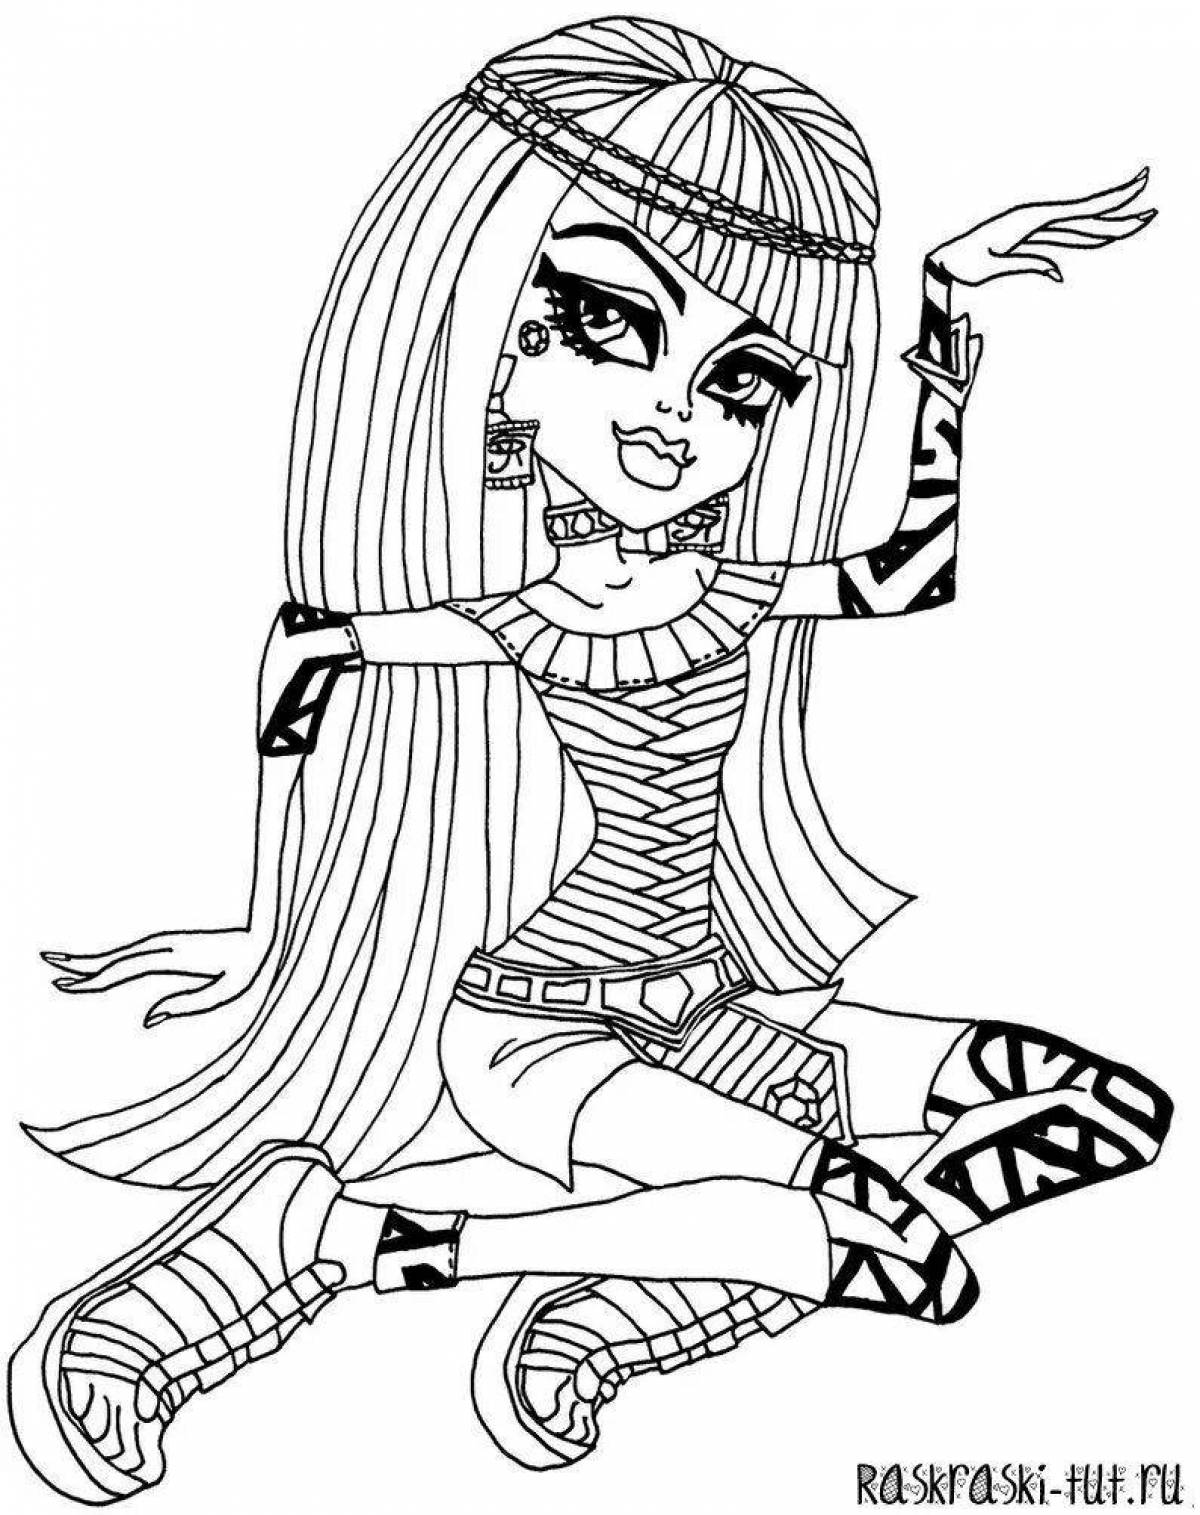 Monster high coloring page